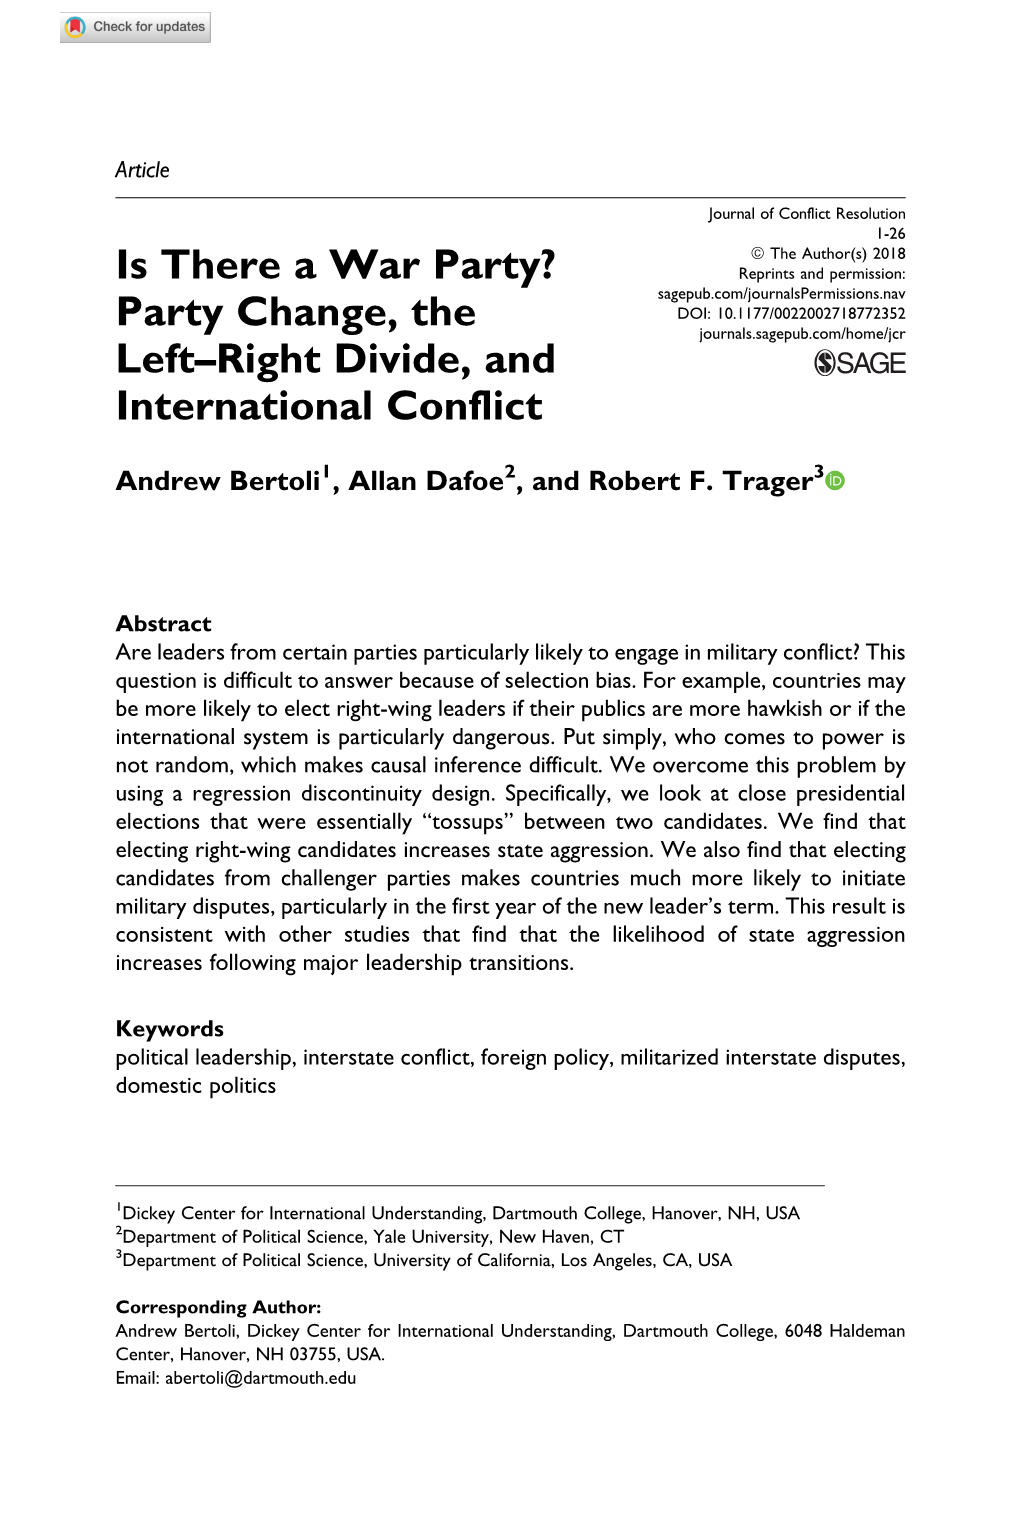 Party Change, the Left–Right Divide, and International Conflict